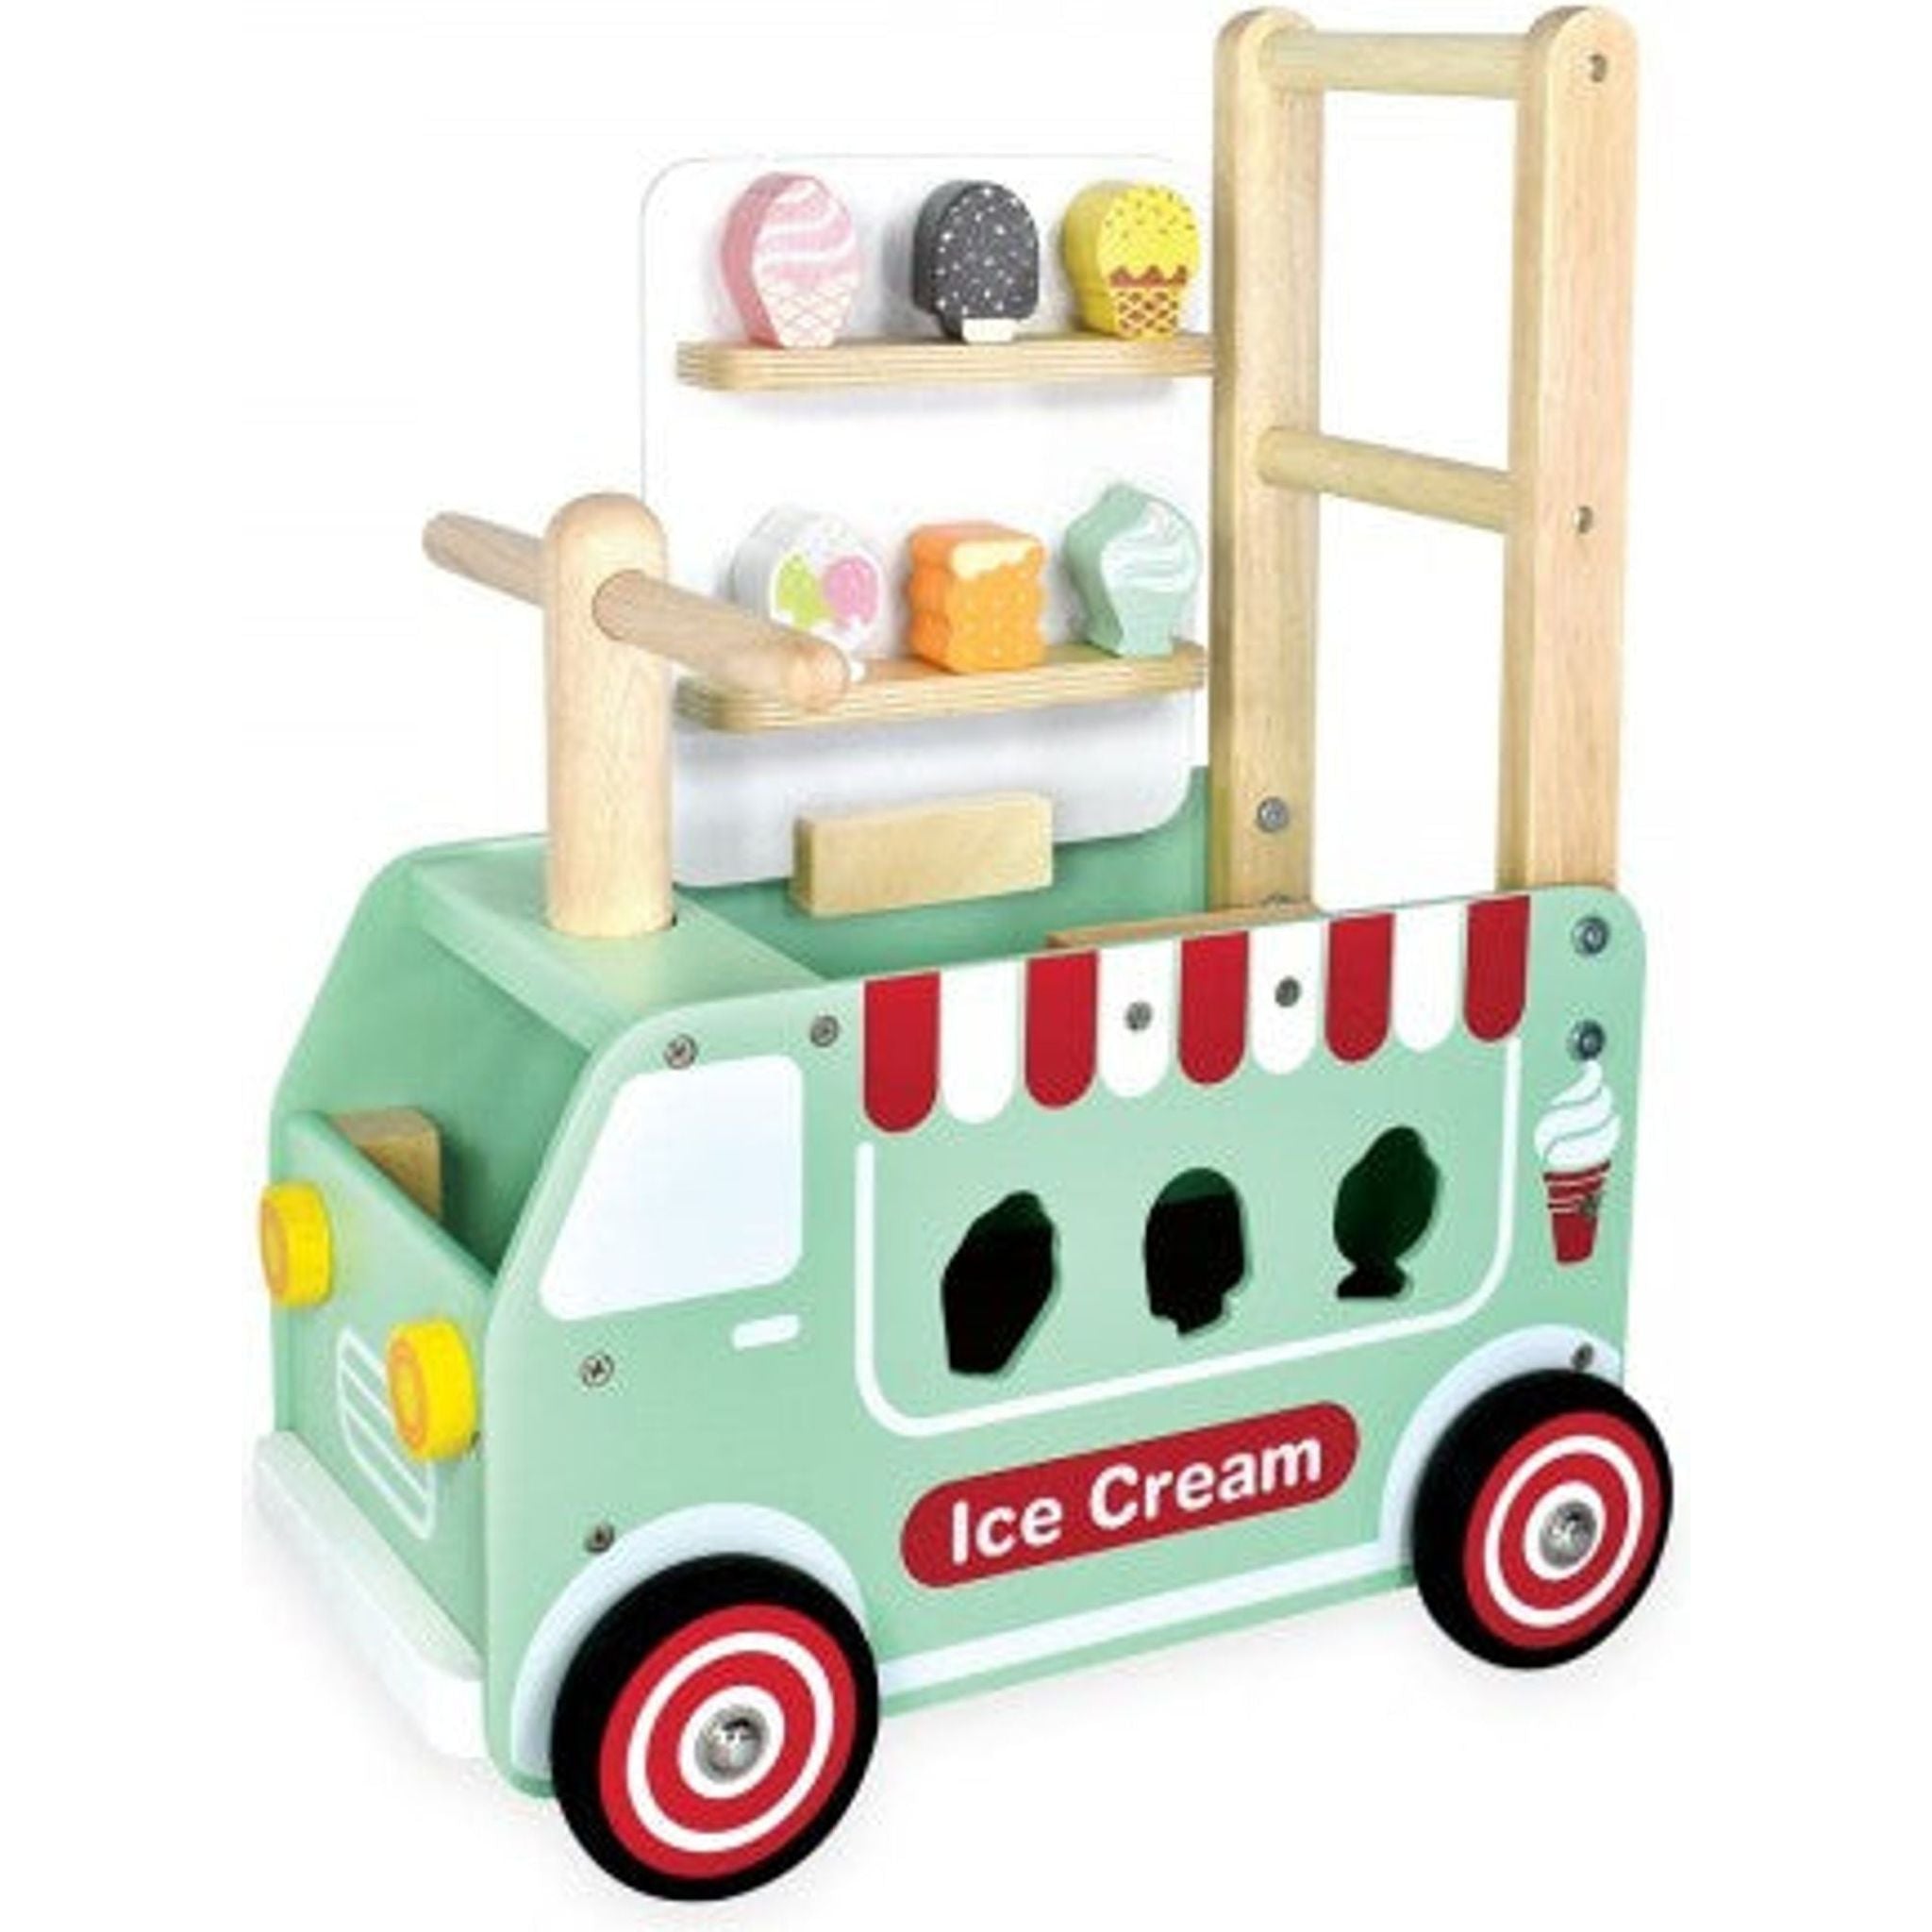 Walk and Ride Ice Cream Truck Sorter - Toybox Tales